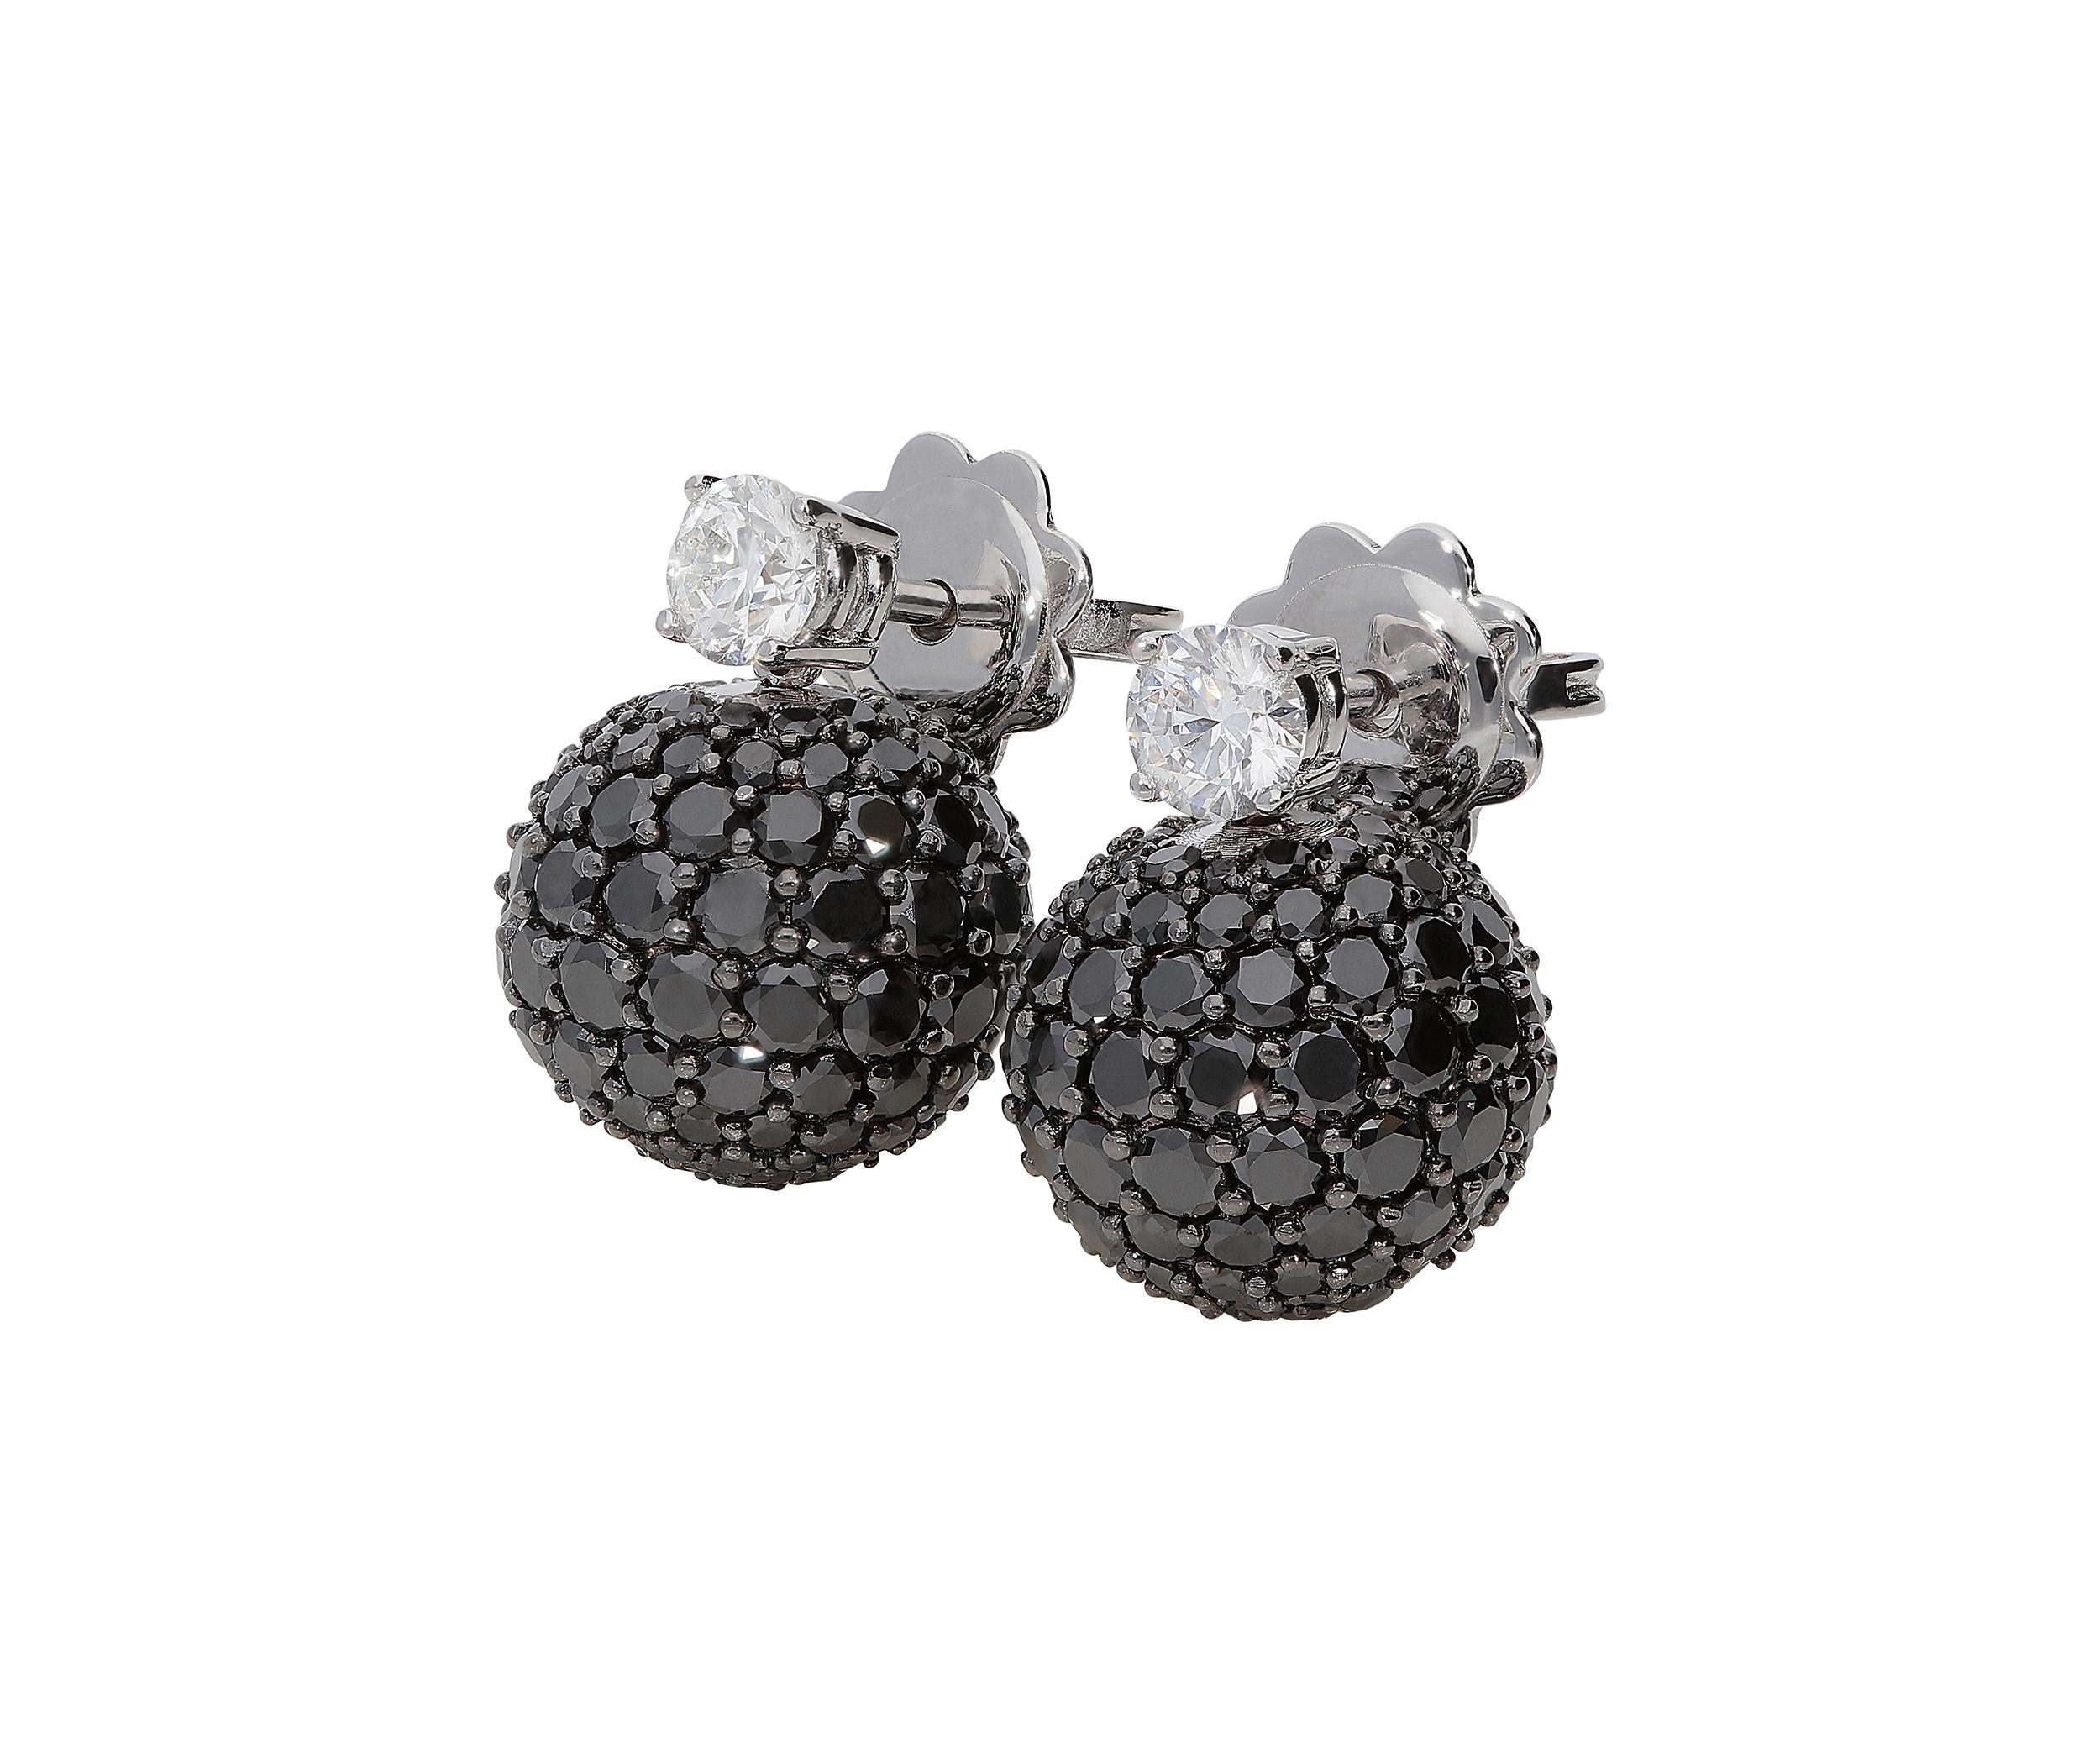 Planet collection earrings with solitaire white round brilliant diamonds color G clarity SI for a total of 0,43 carats as studs and 4,23 carats of black round brilliant diamonds for the boules.
The weight of this pair is 5,00 grams of 18kt white